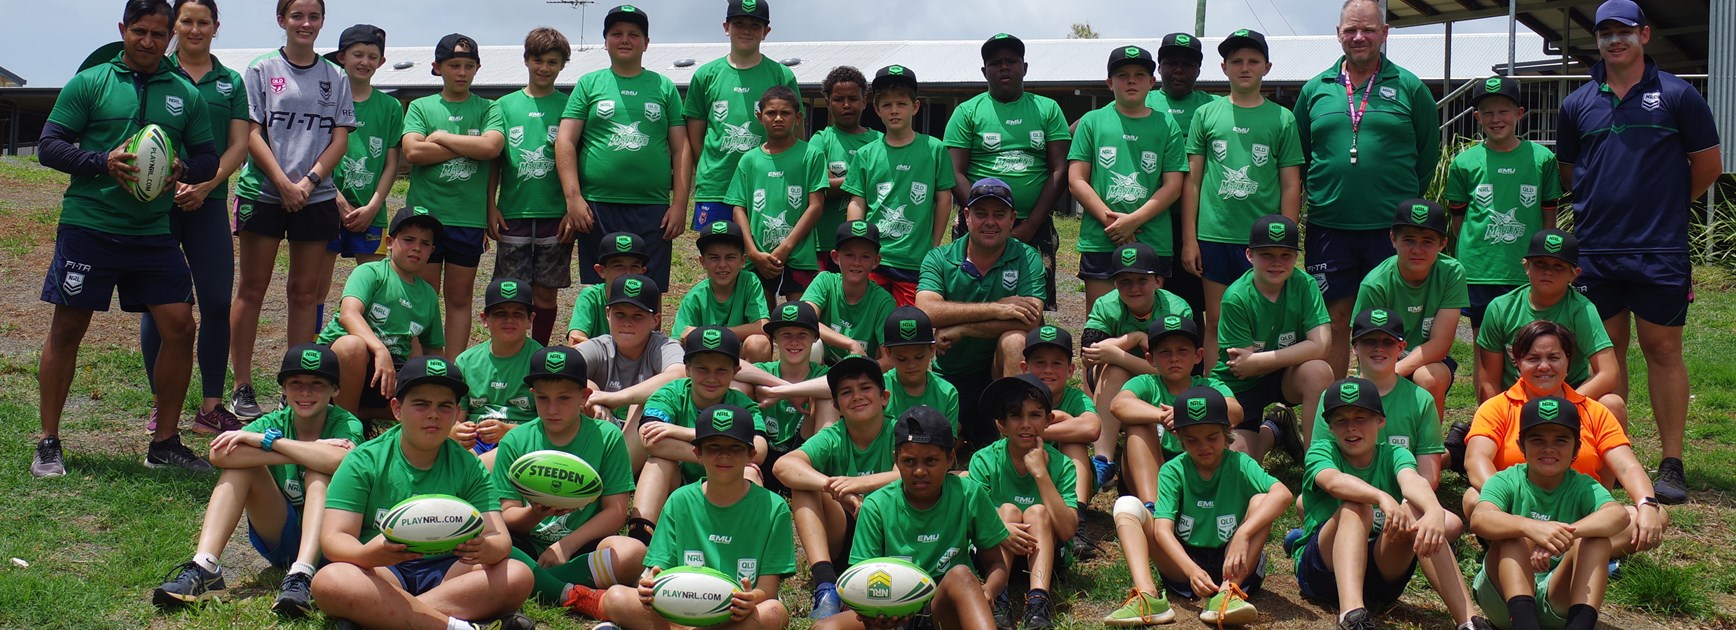 Northern youngsters gain skills at spring camp